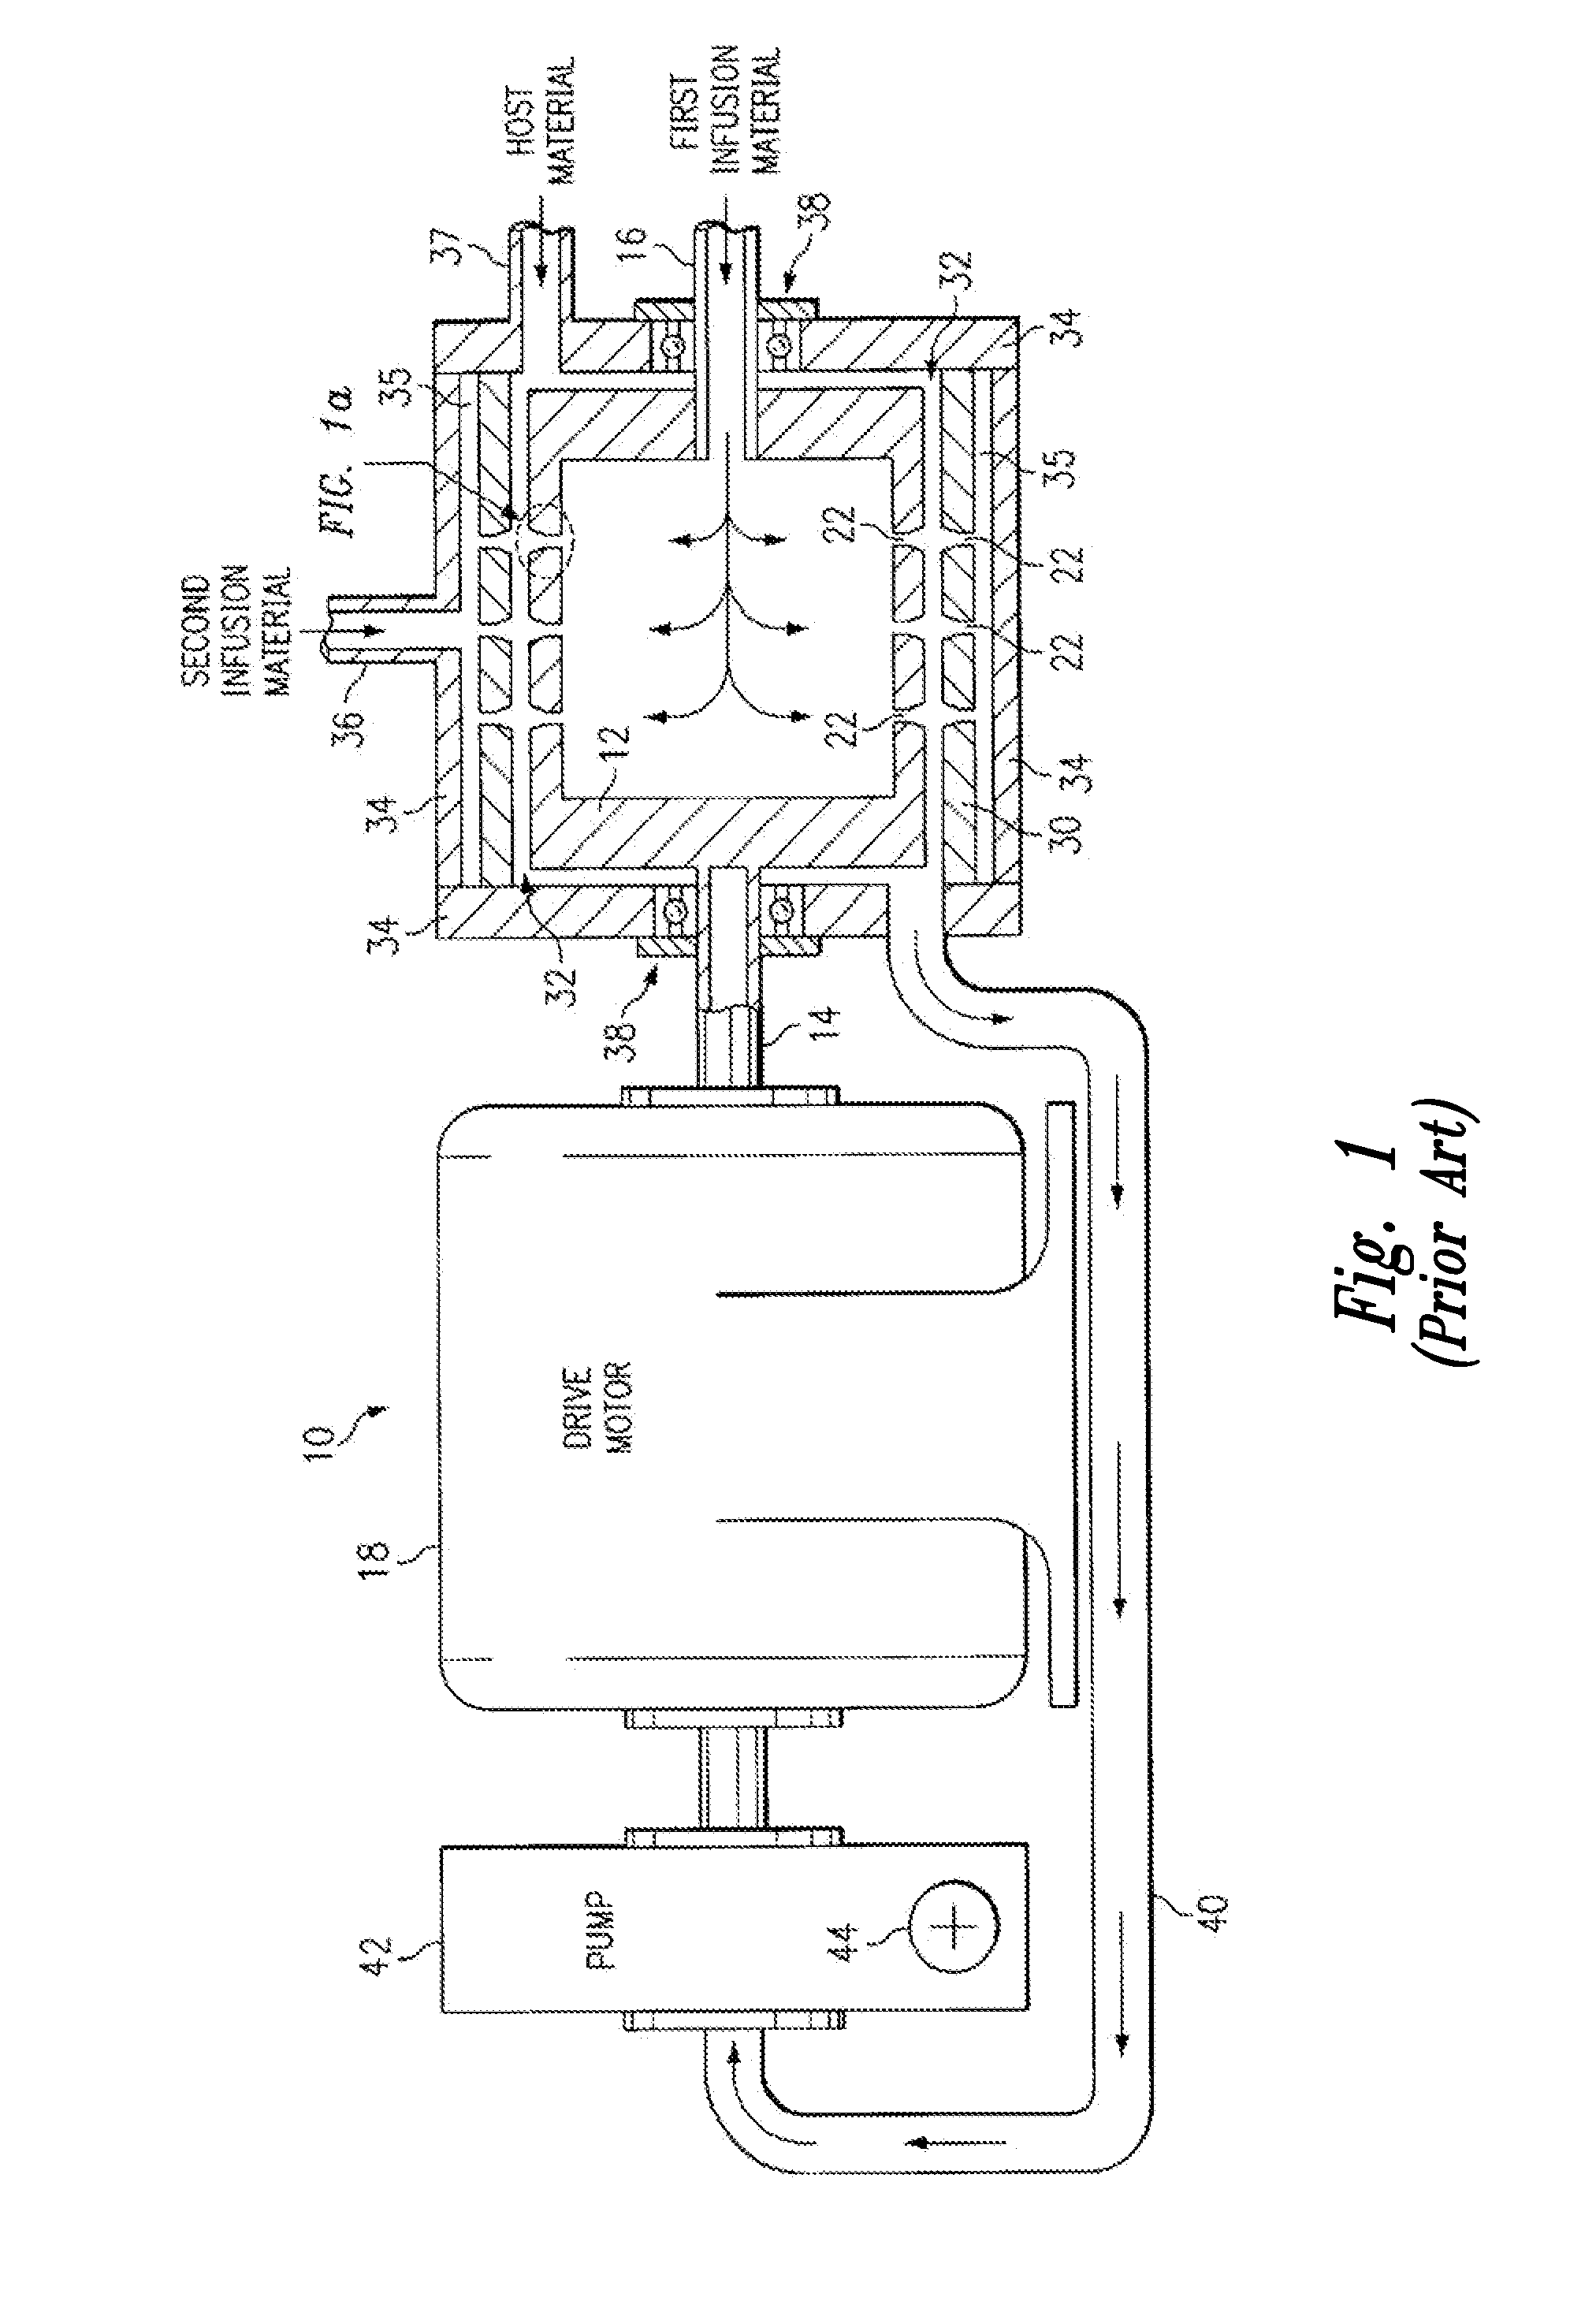 Compositions and methods for modulating cellular membrane-mediated intracellular signal transduction